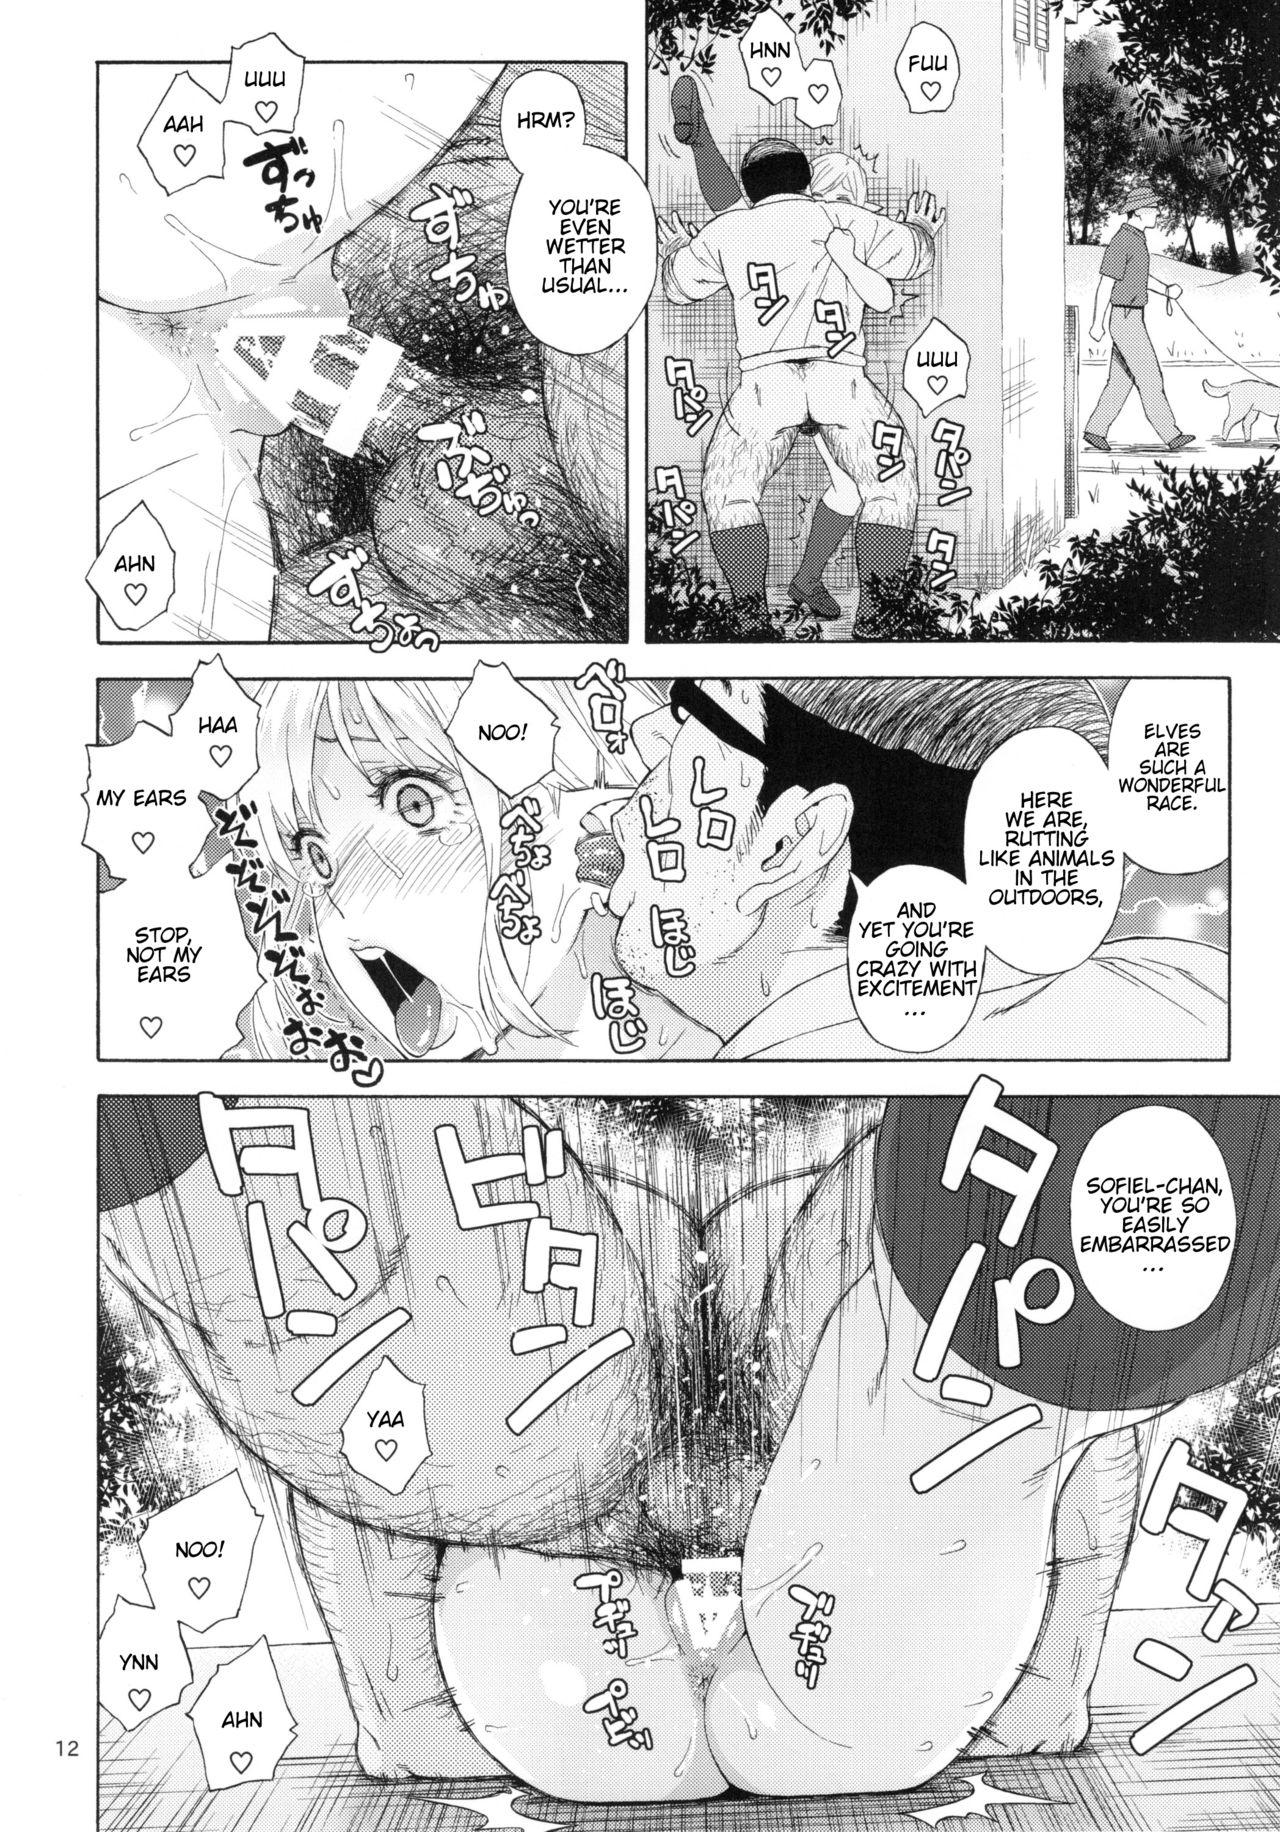 Cfnm (C92) [666PROTECT (Jingrock)] Tenkousei JK Elf 3 -Houkago Yagai Jugyou- | High School Elven Transfer Student -After School Outdoor Lessons- [English] [Tremalkinger] First - Page 12